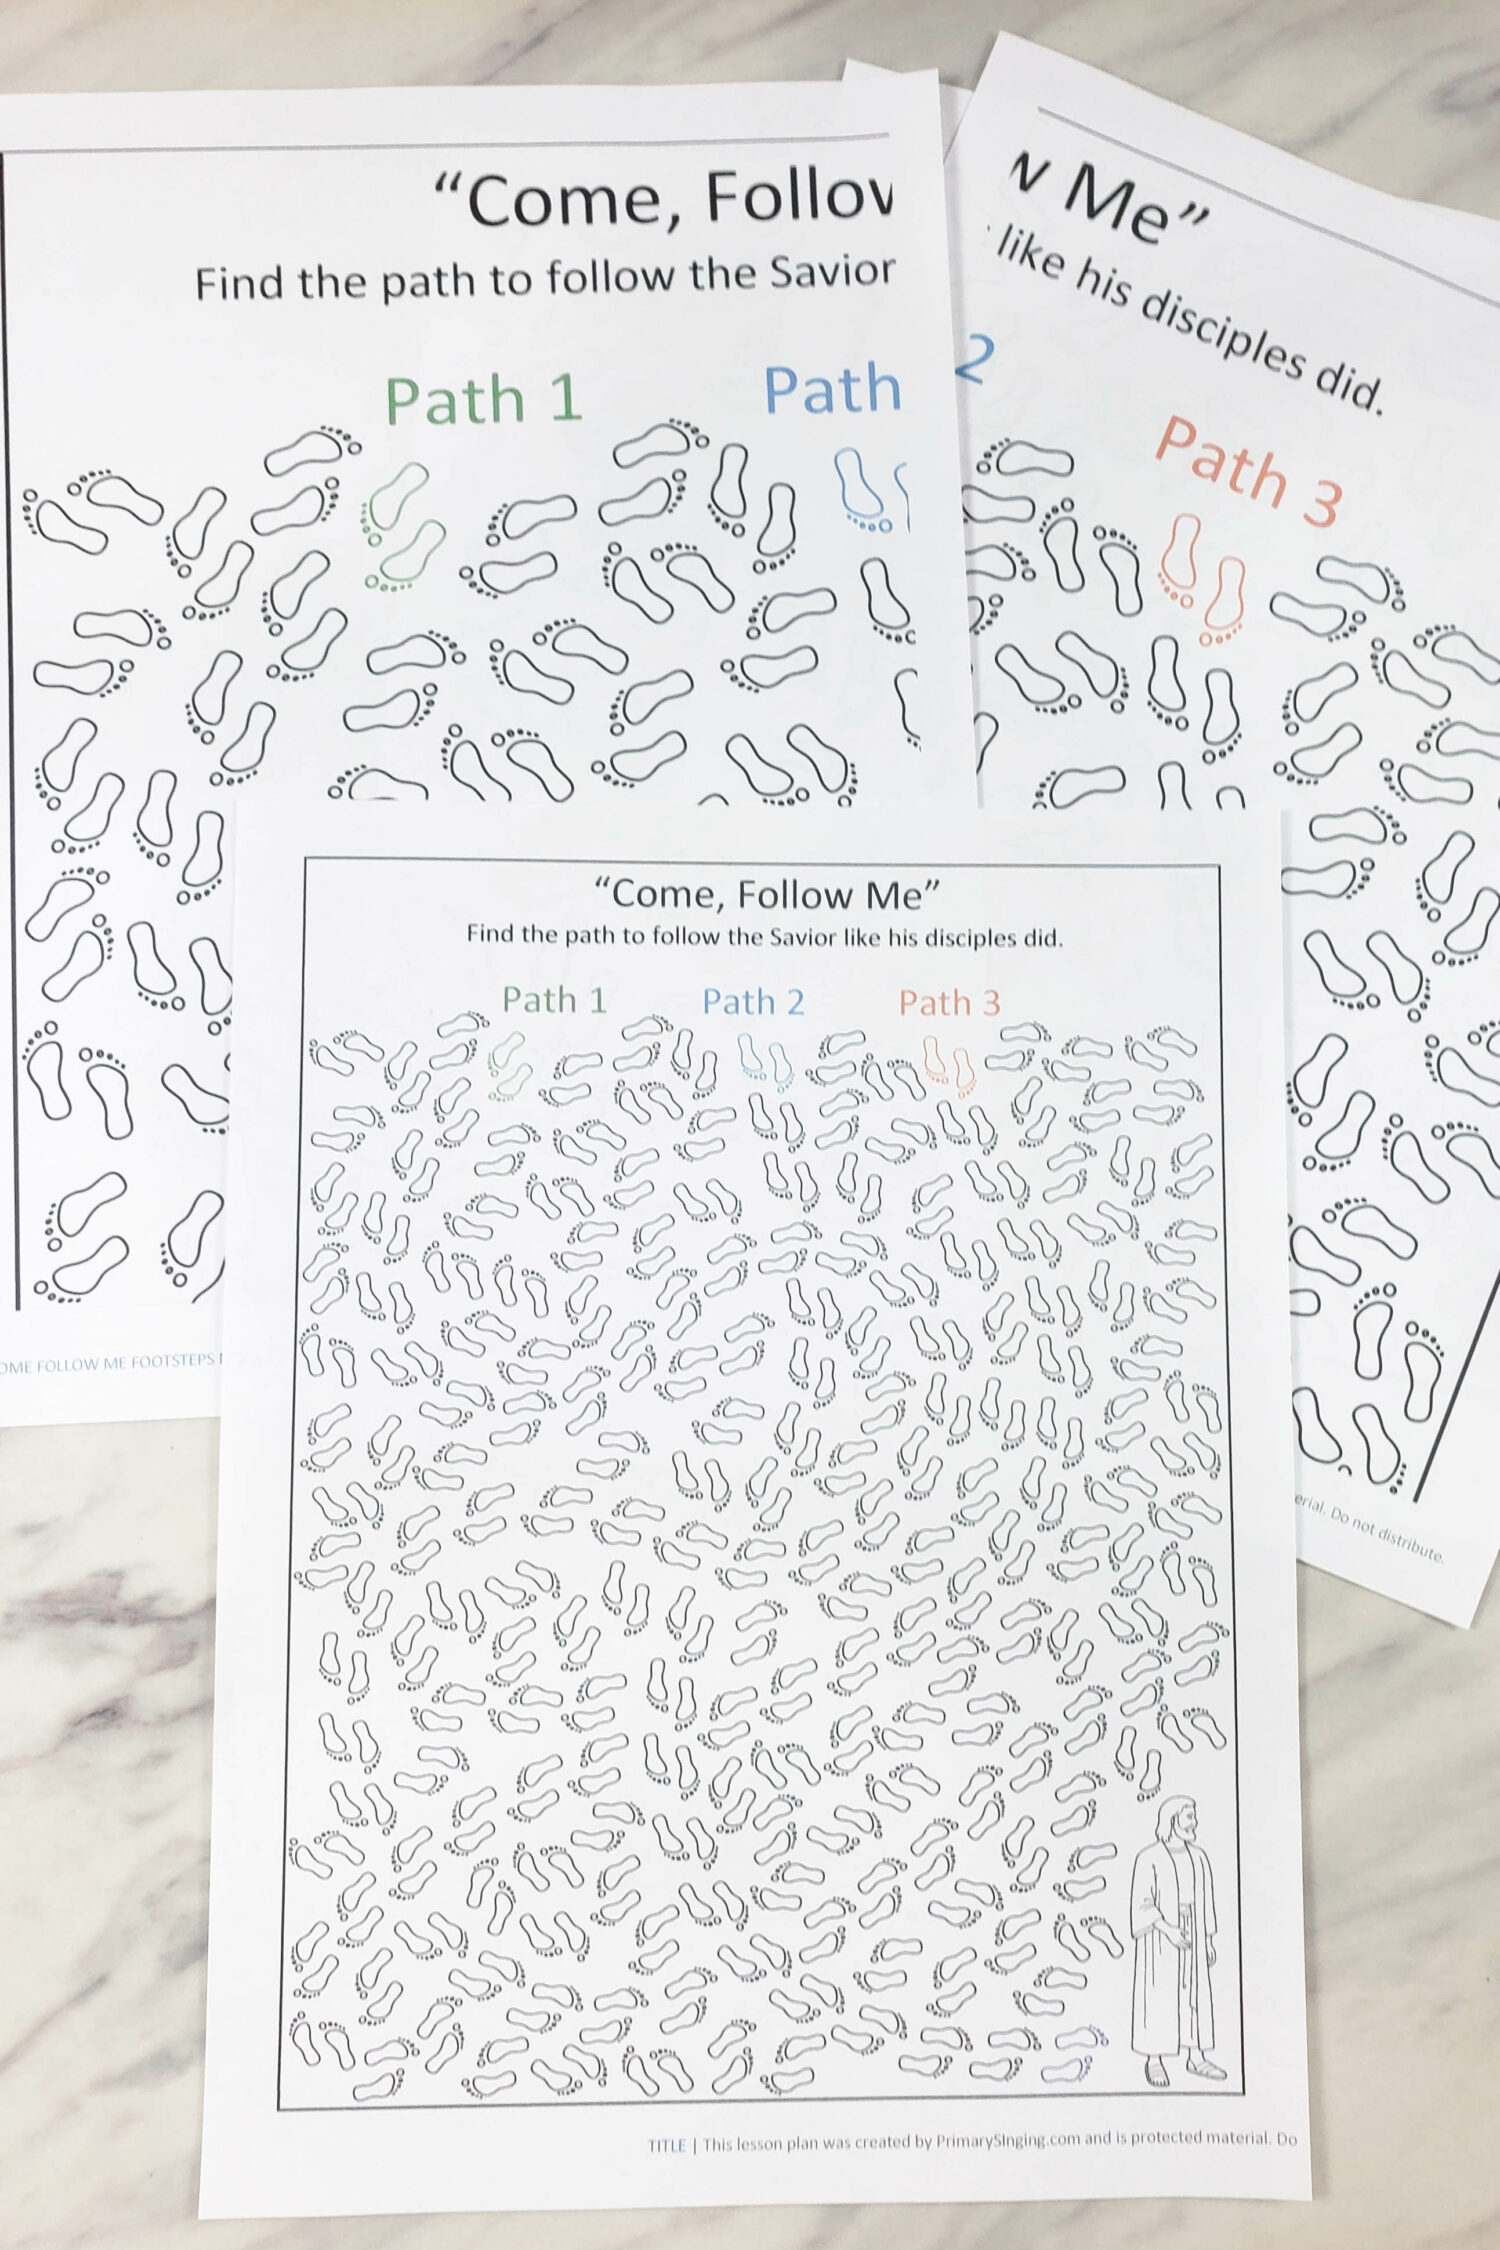 Grab this Come Follow Me footstep maze to have a meaningful way to teach this song in Primary singing time! Includes printable song helps for LDS music leaders. Helps teach the meaningful lyrics "then let us in his footsteps tread" with an interactive activity or a 1-page printable maze option for individuals Come Follow Me study at home!